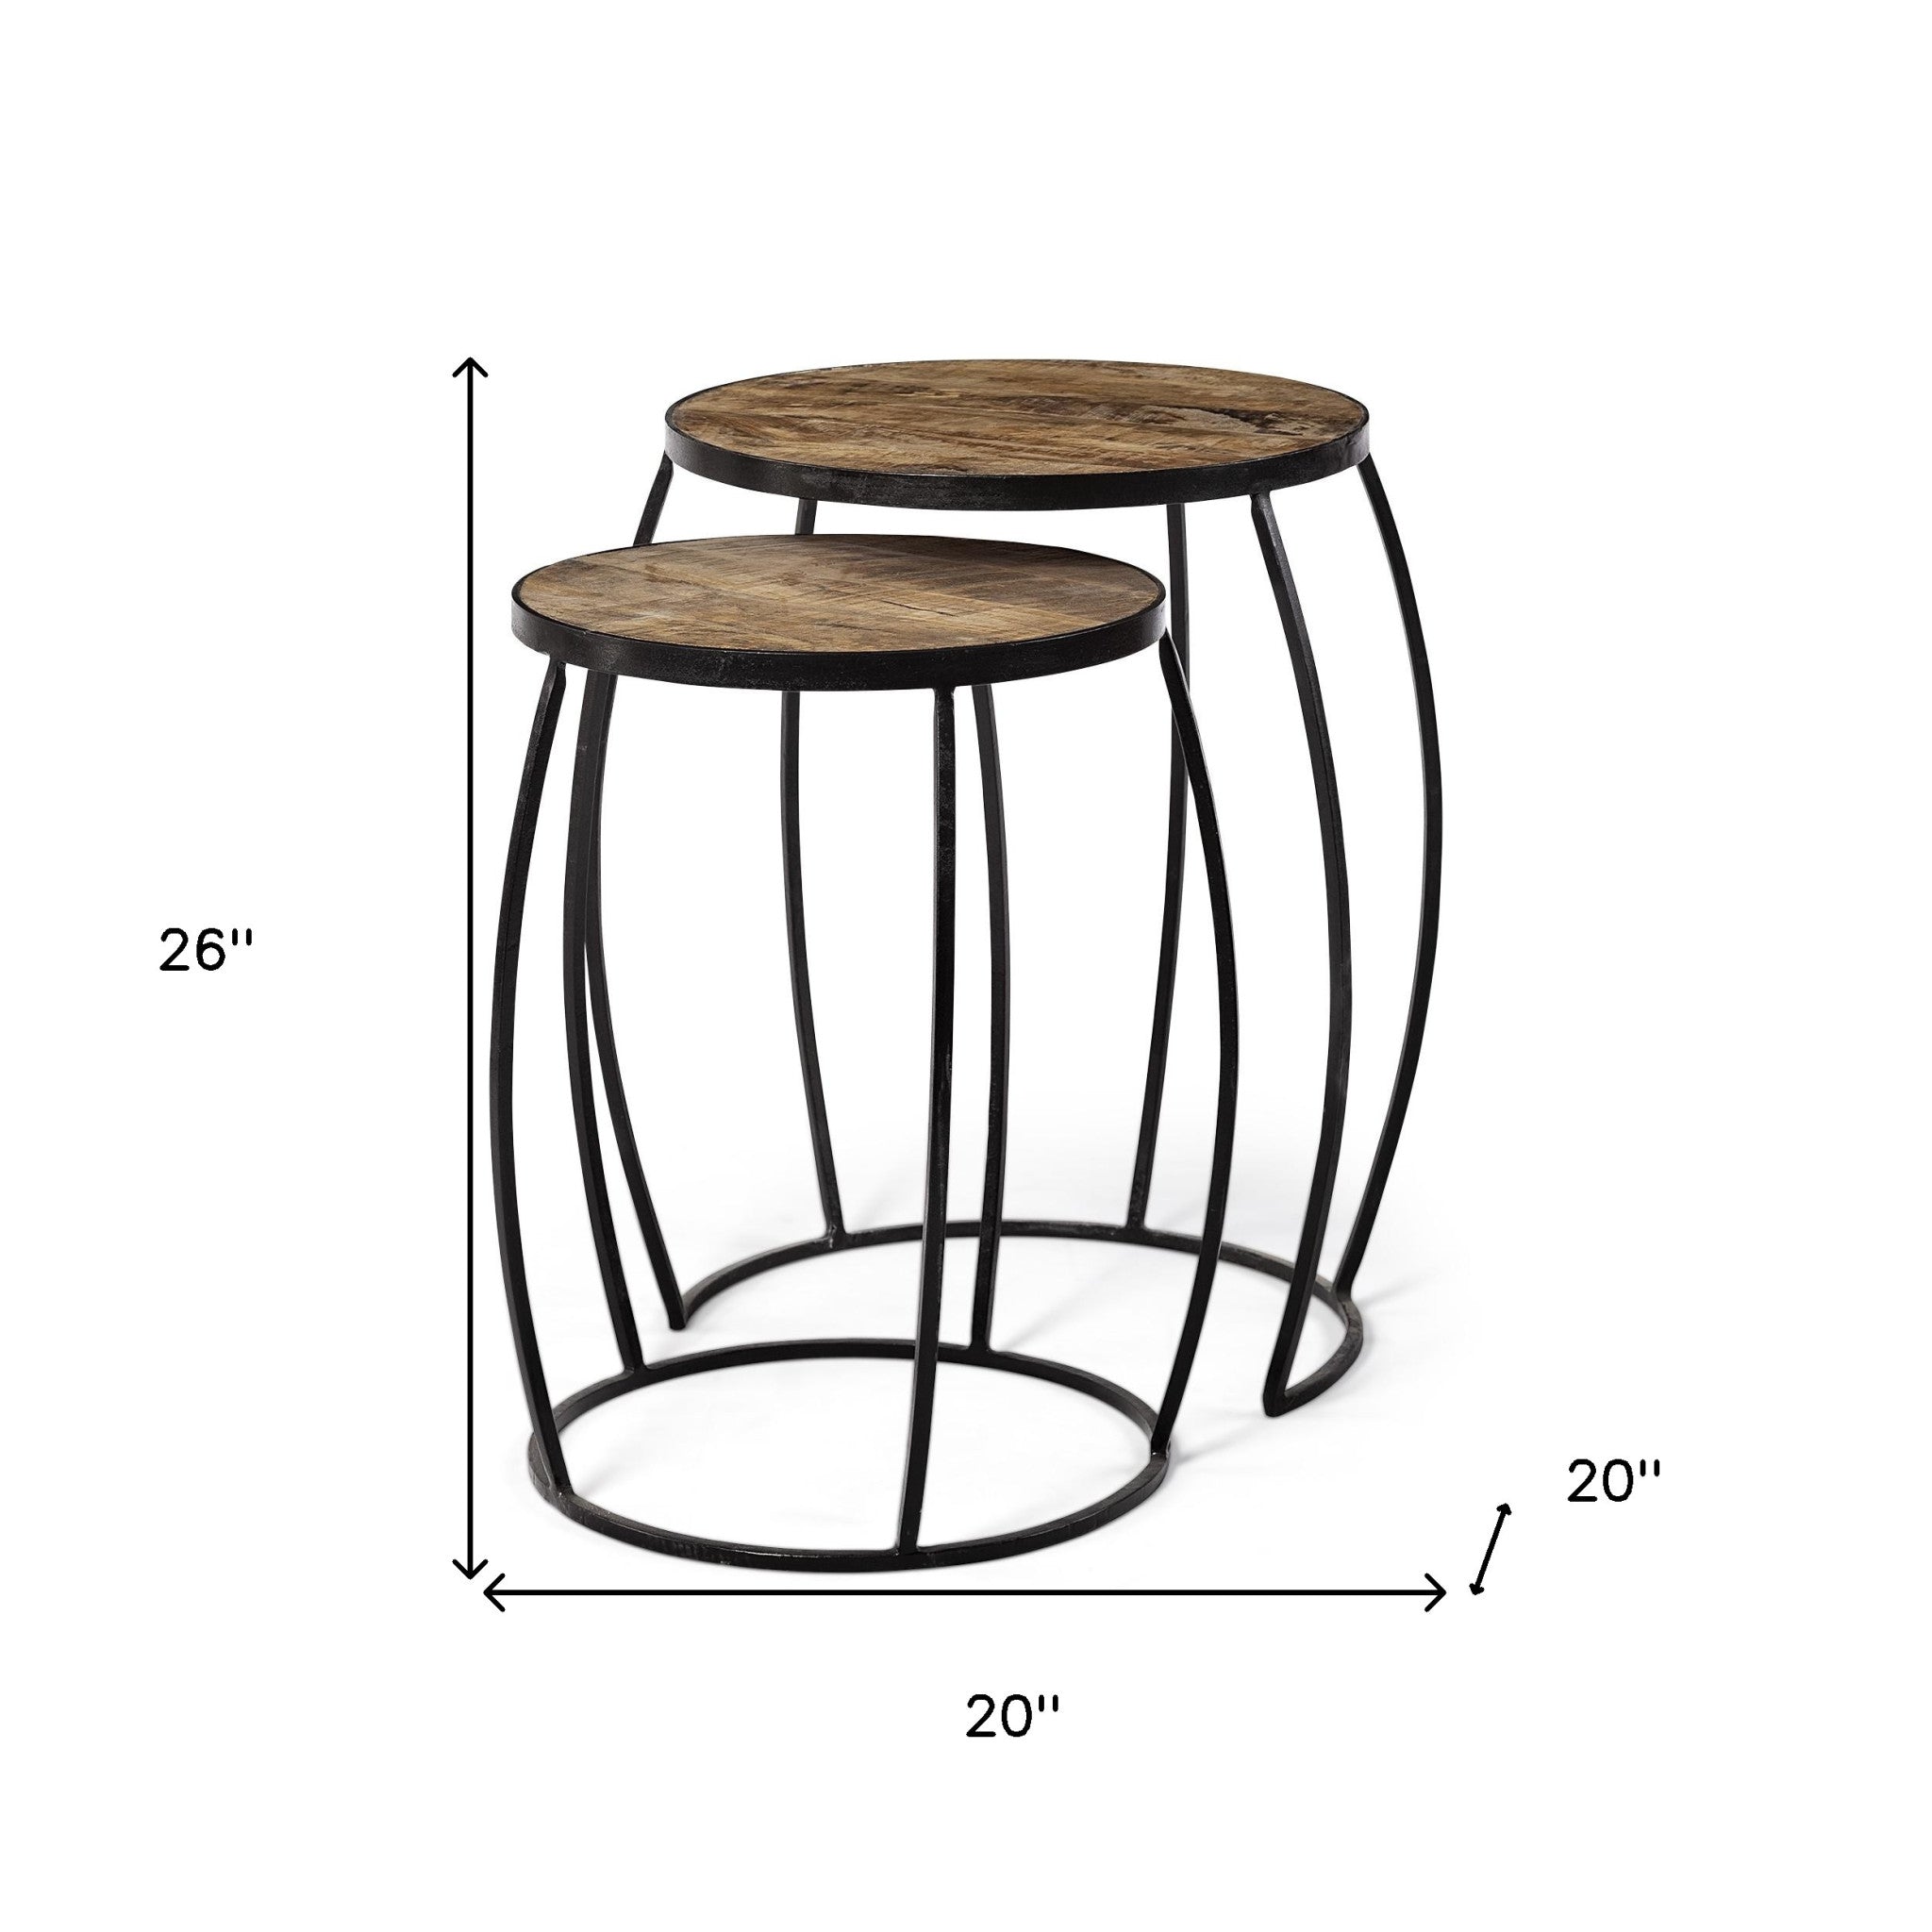 Set of Two 26" Black And Brown Solid Wood Round End Table